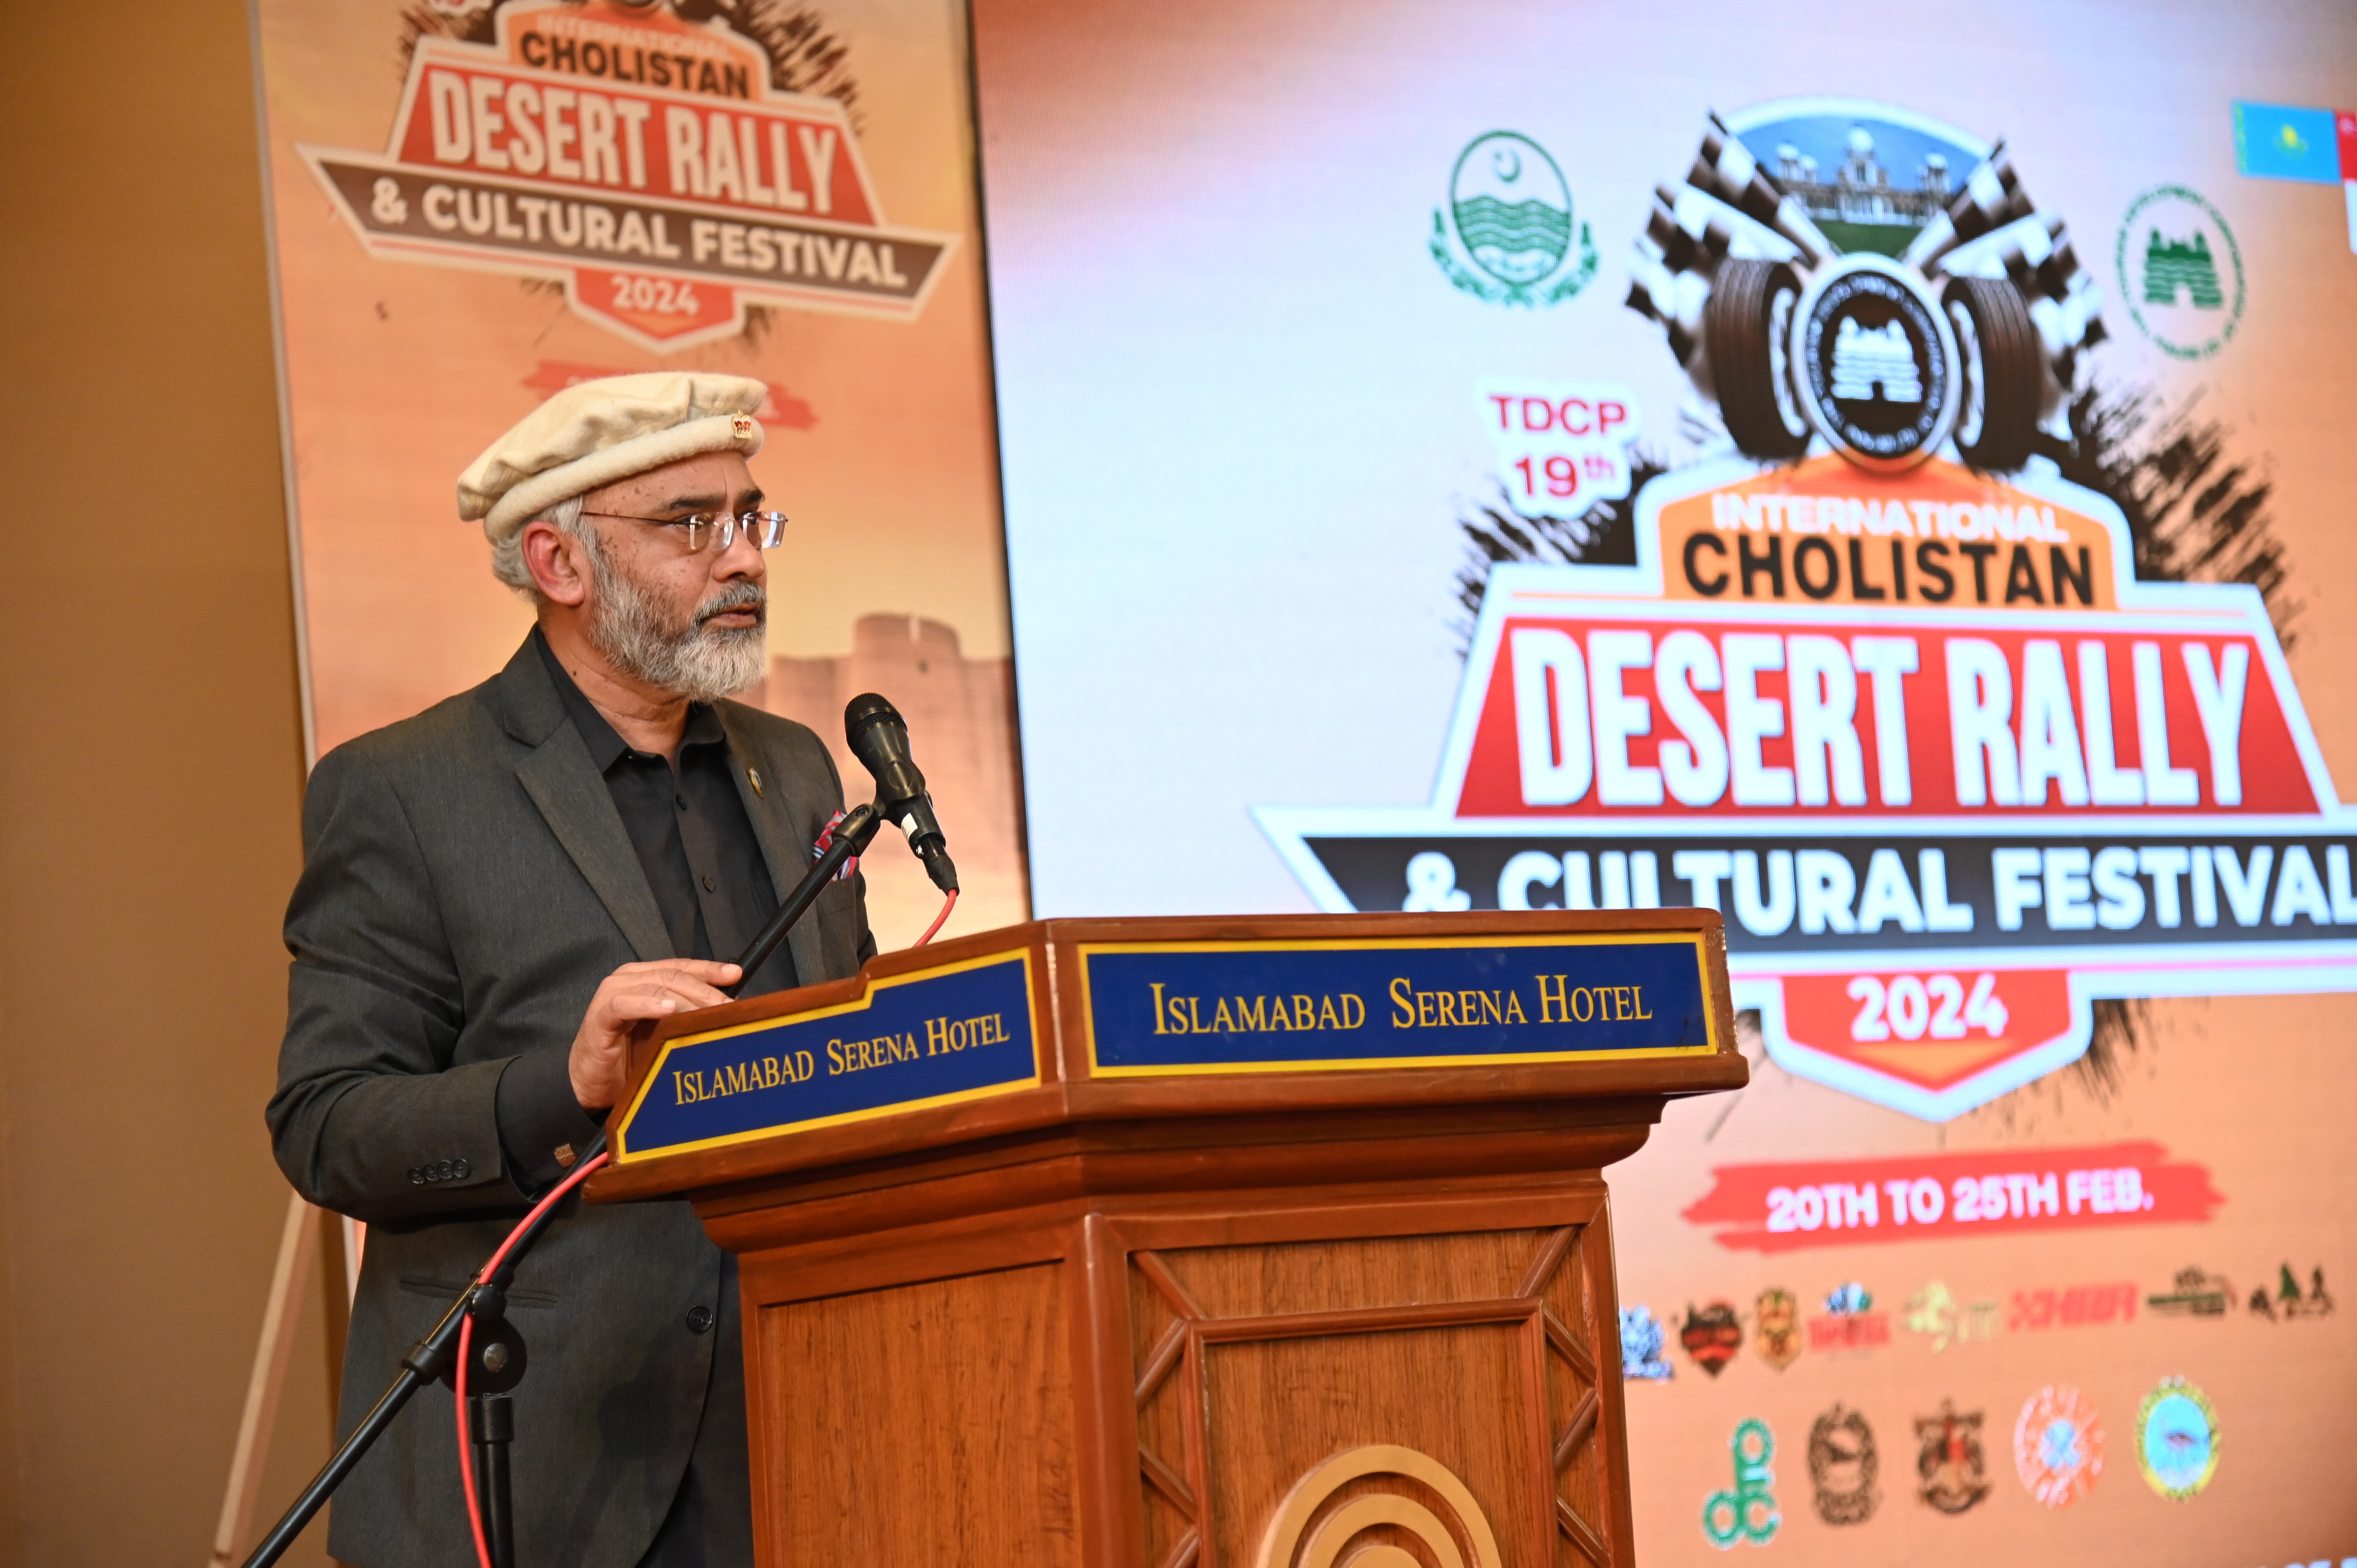 Mr Aftab ur Rehman, chairman of PTDC briefing about the desert rally